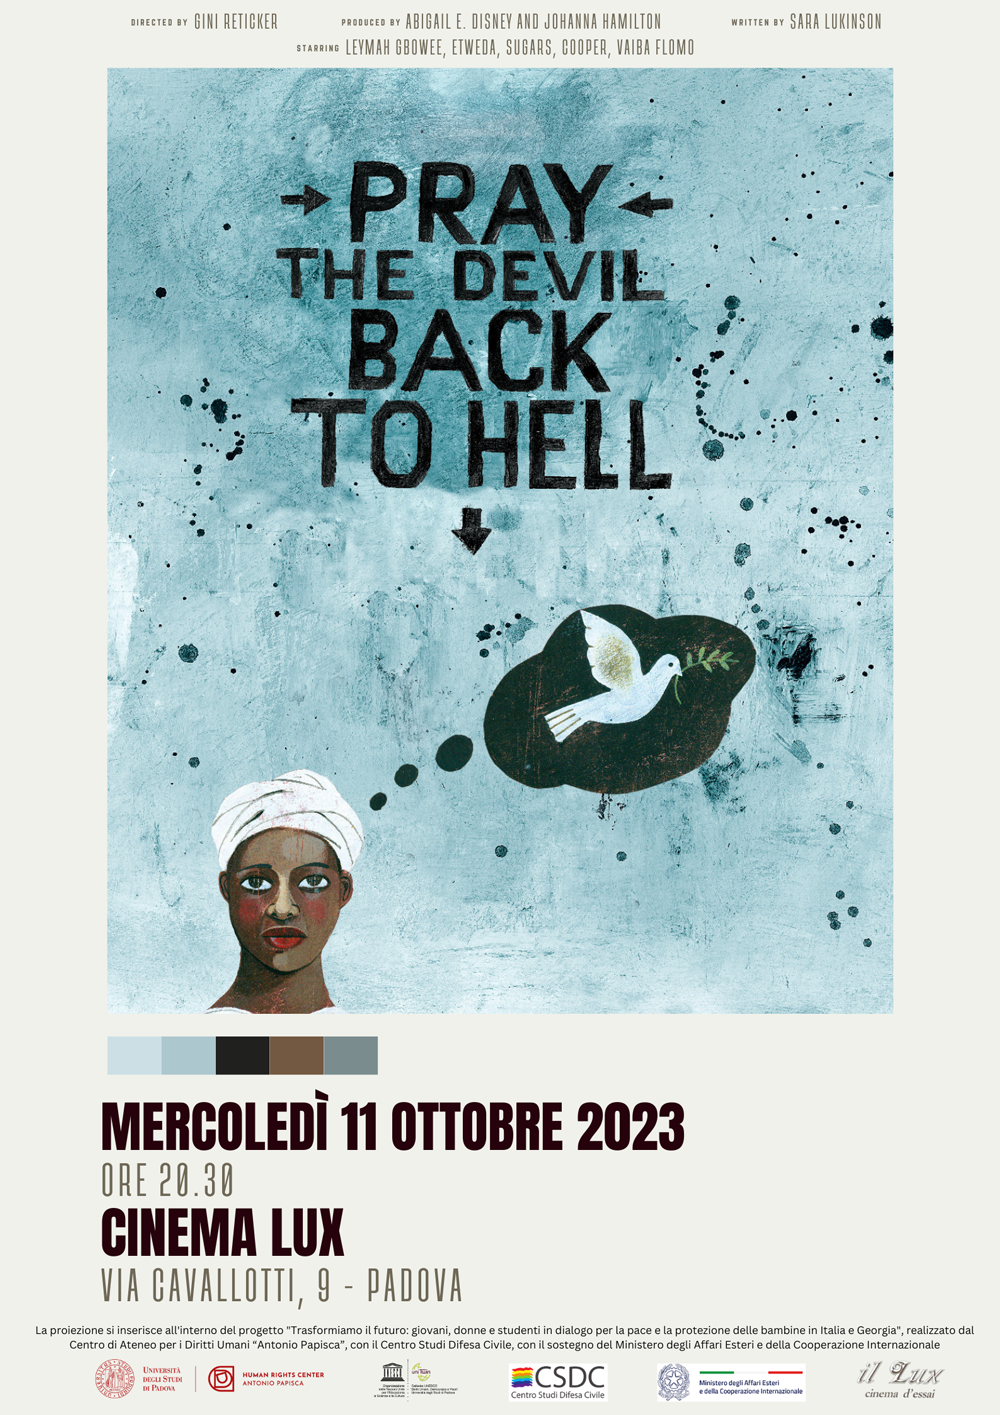 Movie poster for the film Pray the Devil Back to Hell. Drawing of an African woman on a blue background thinking of a dove, symbol of peace